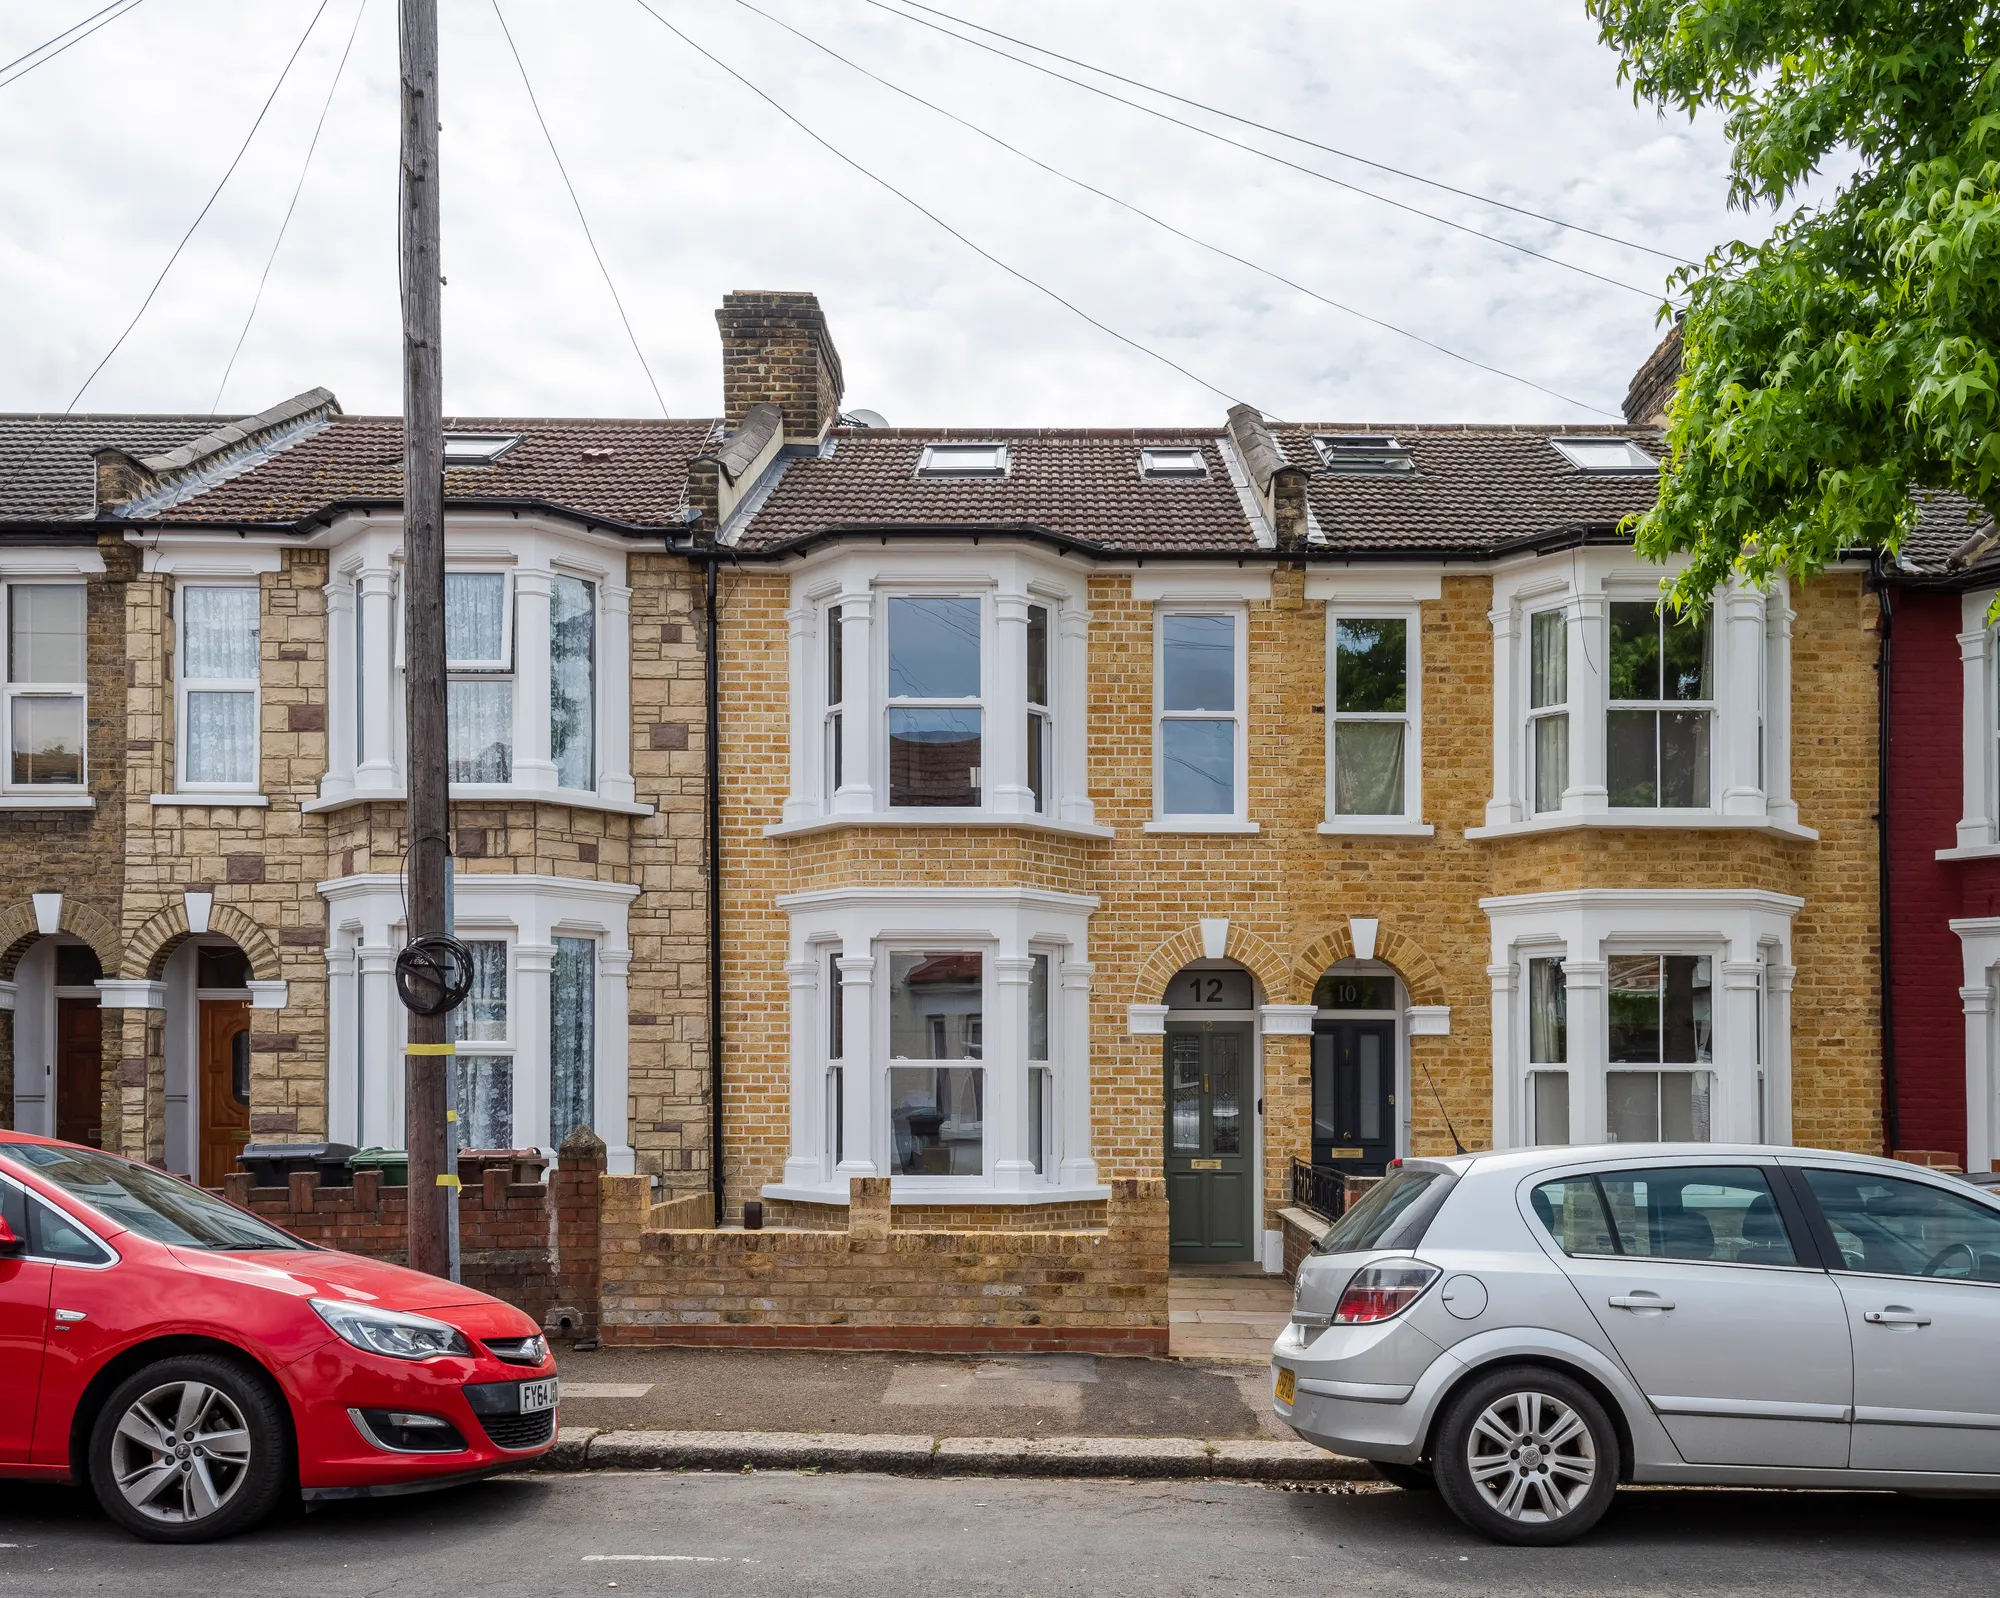 4 bed mid-terraced house for sale in Palamos Road, Leyton - Property Image 1